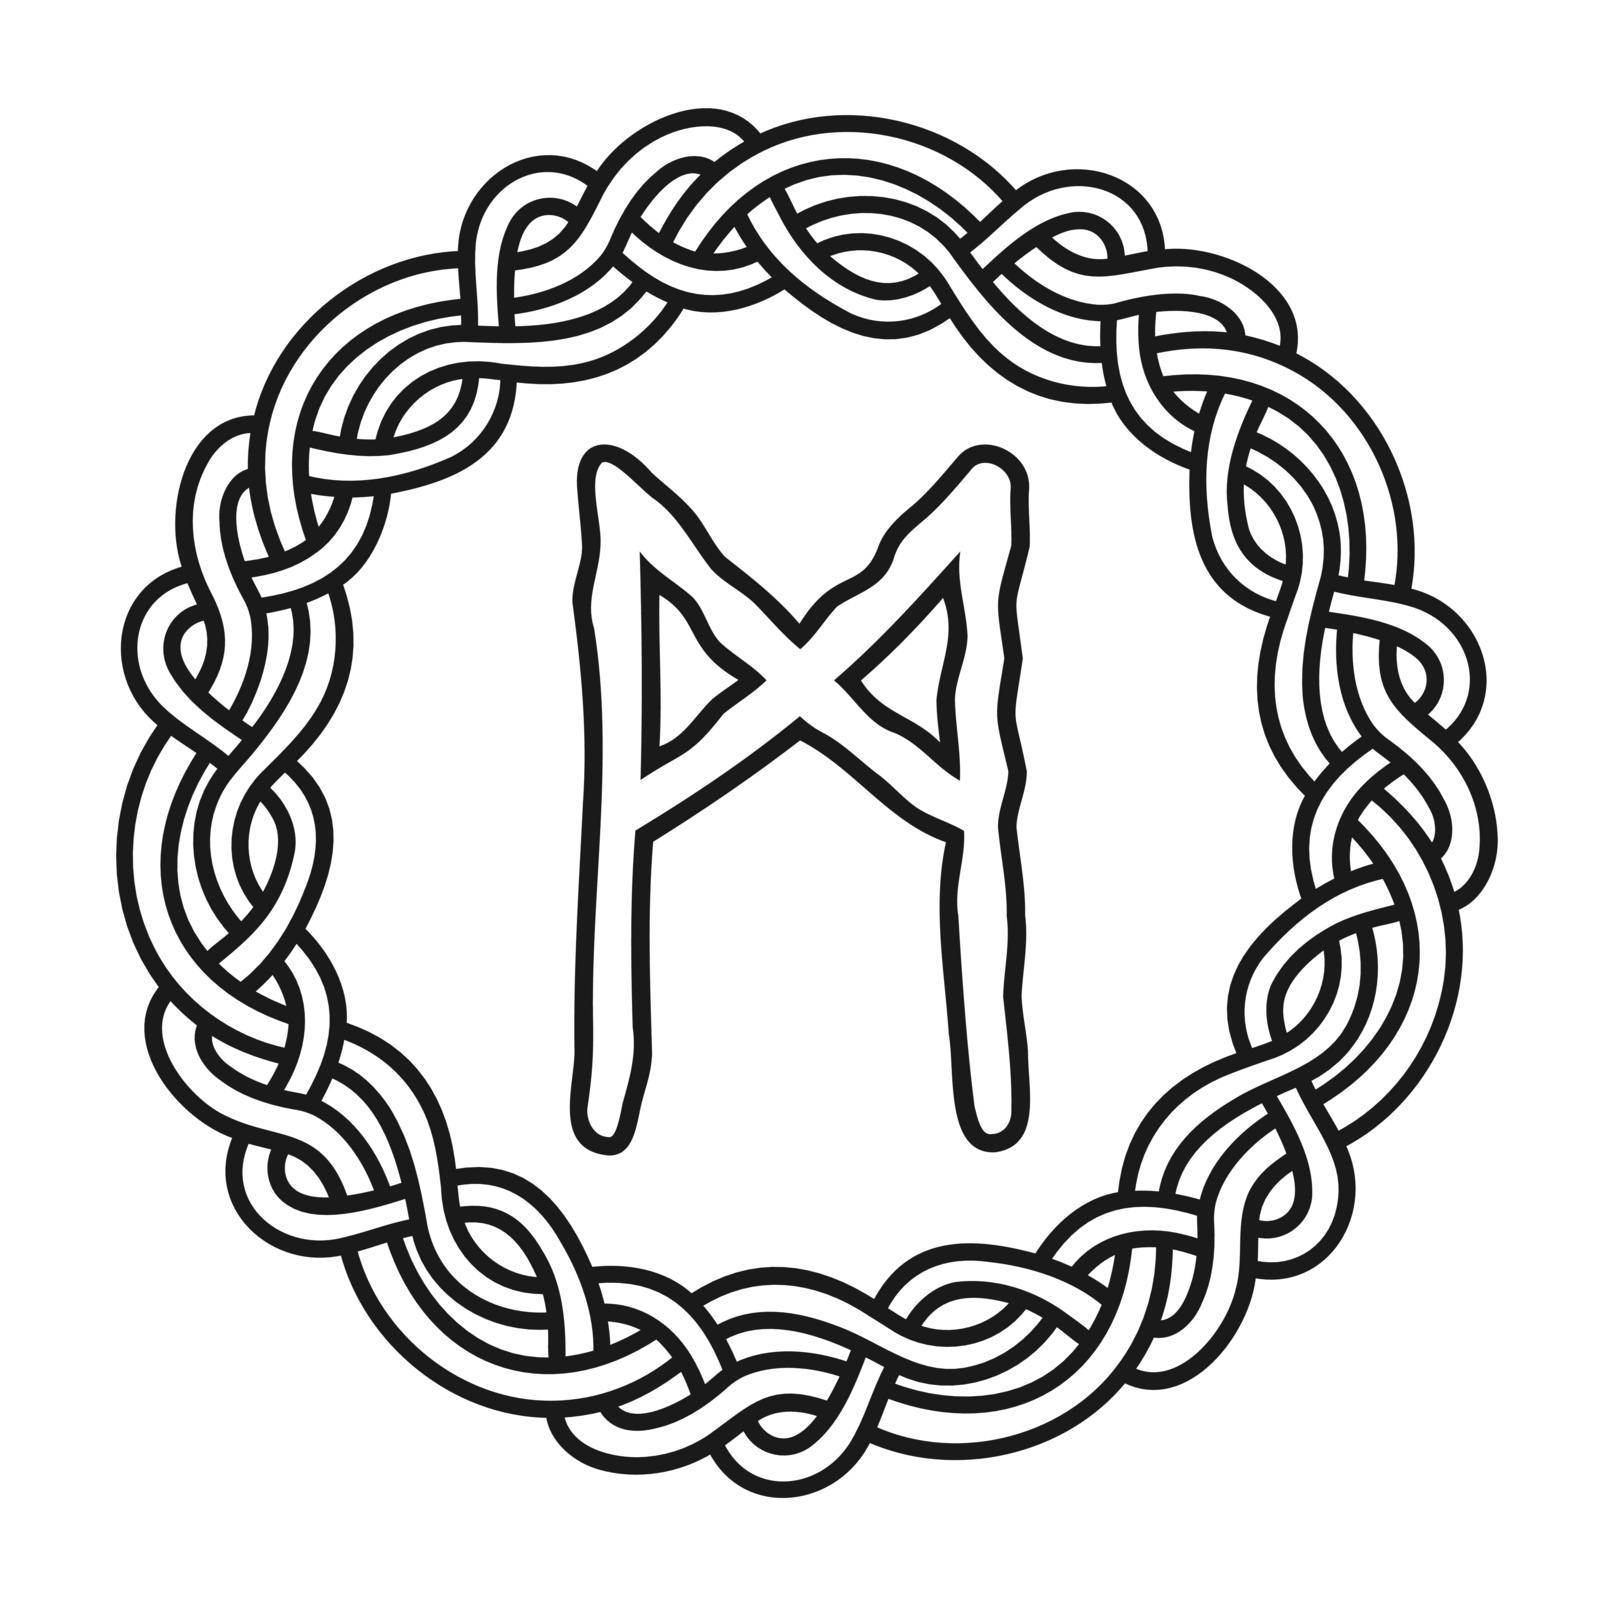 Rune Mannaz in a circle - an ancient Scandinavian symbol or sign, amulet. Viking writing. Hand drawn outline vector illustration for websites, games, print and engraving.